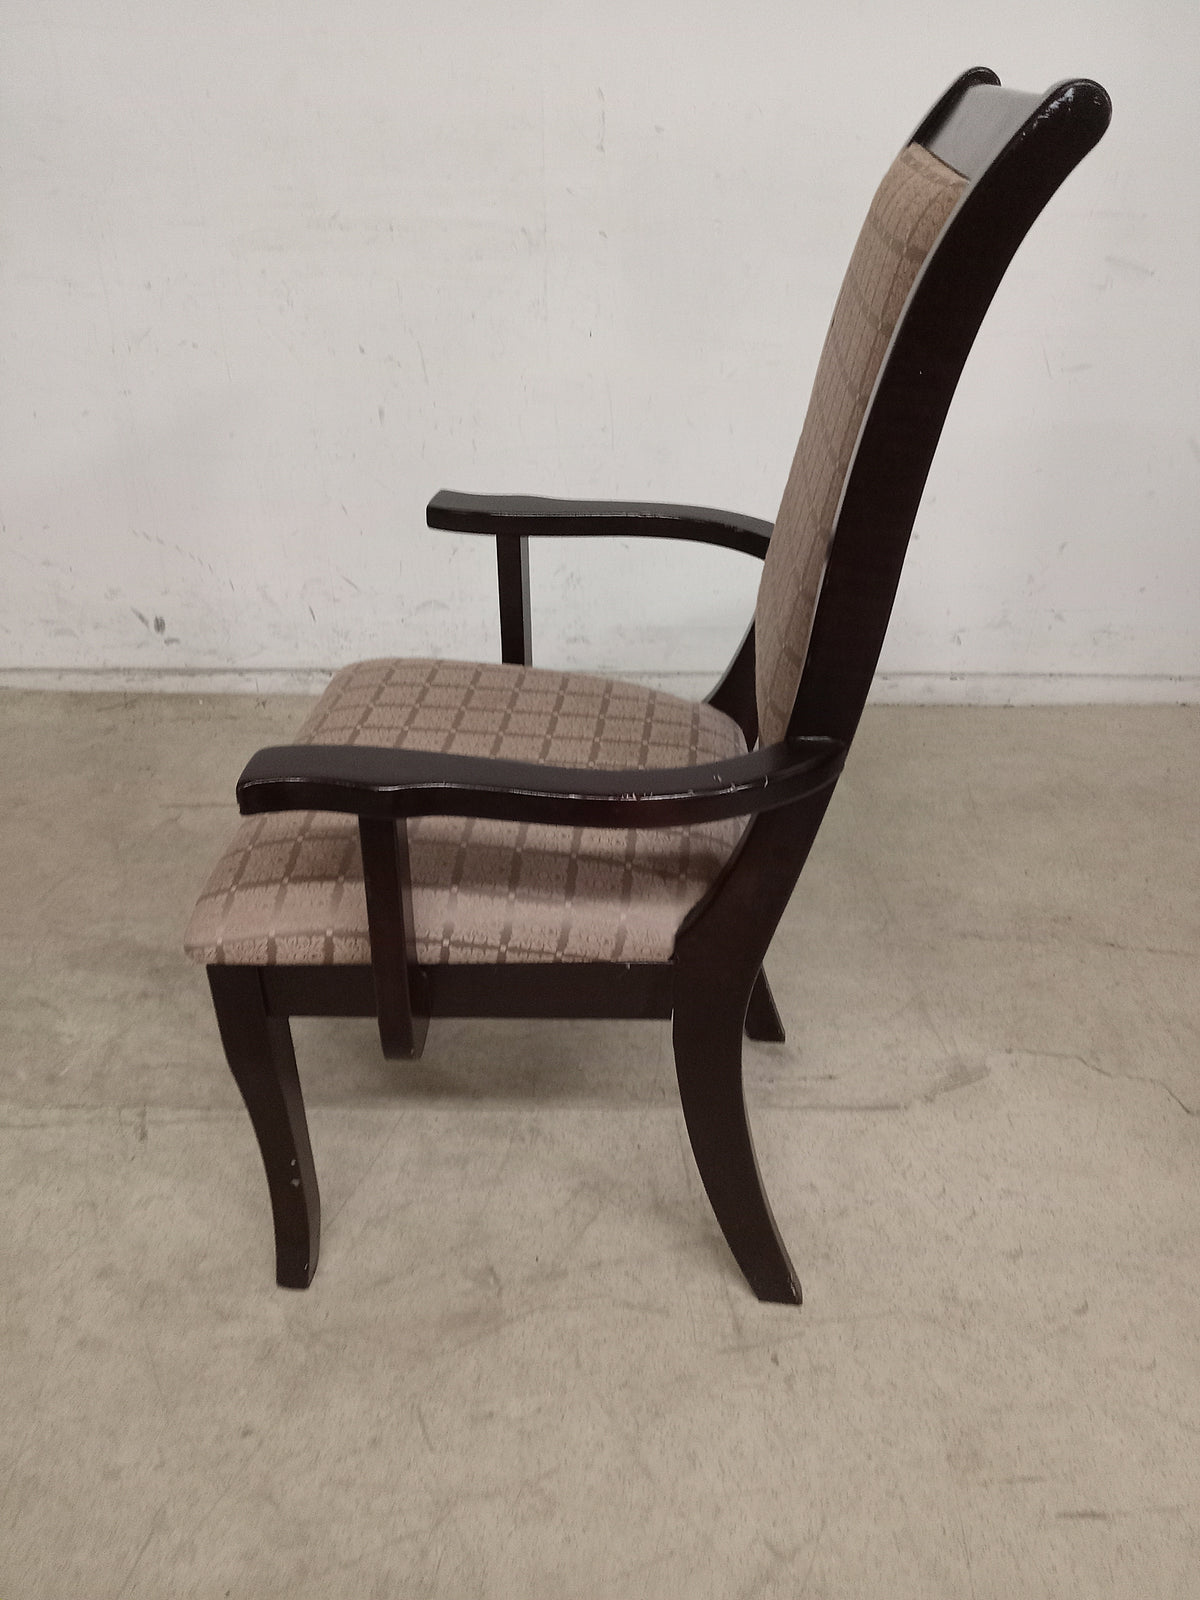 Set of 5 18.5"W Brown Dining Chairs